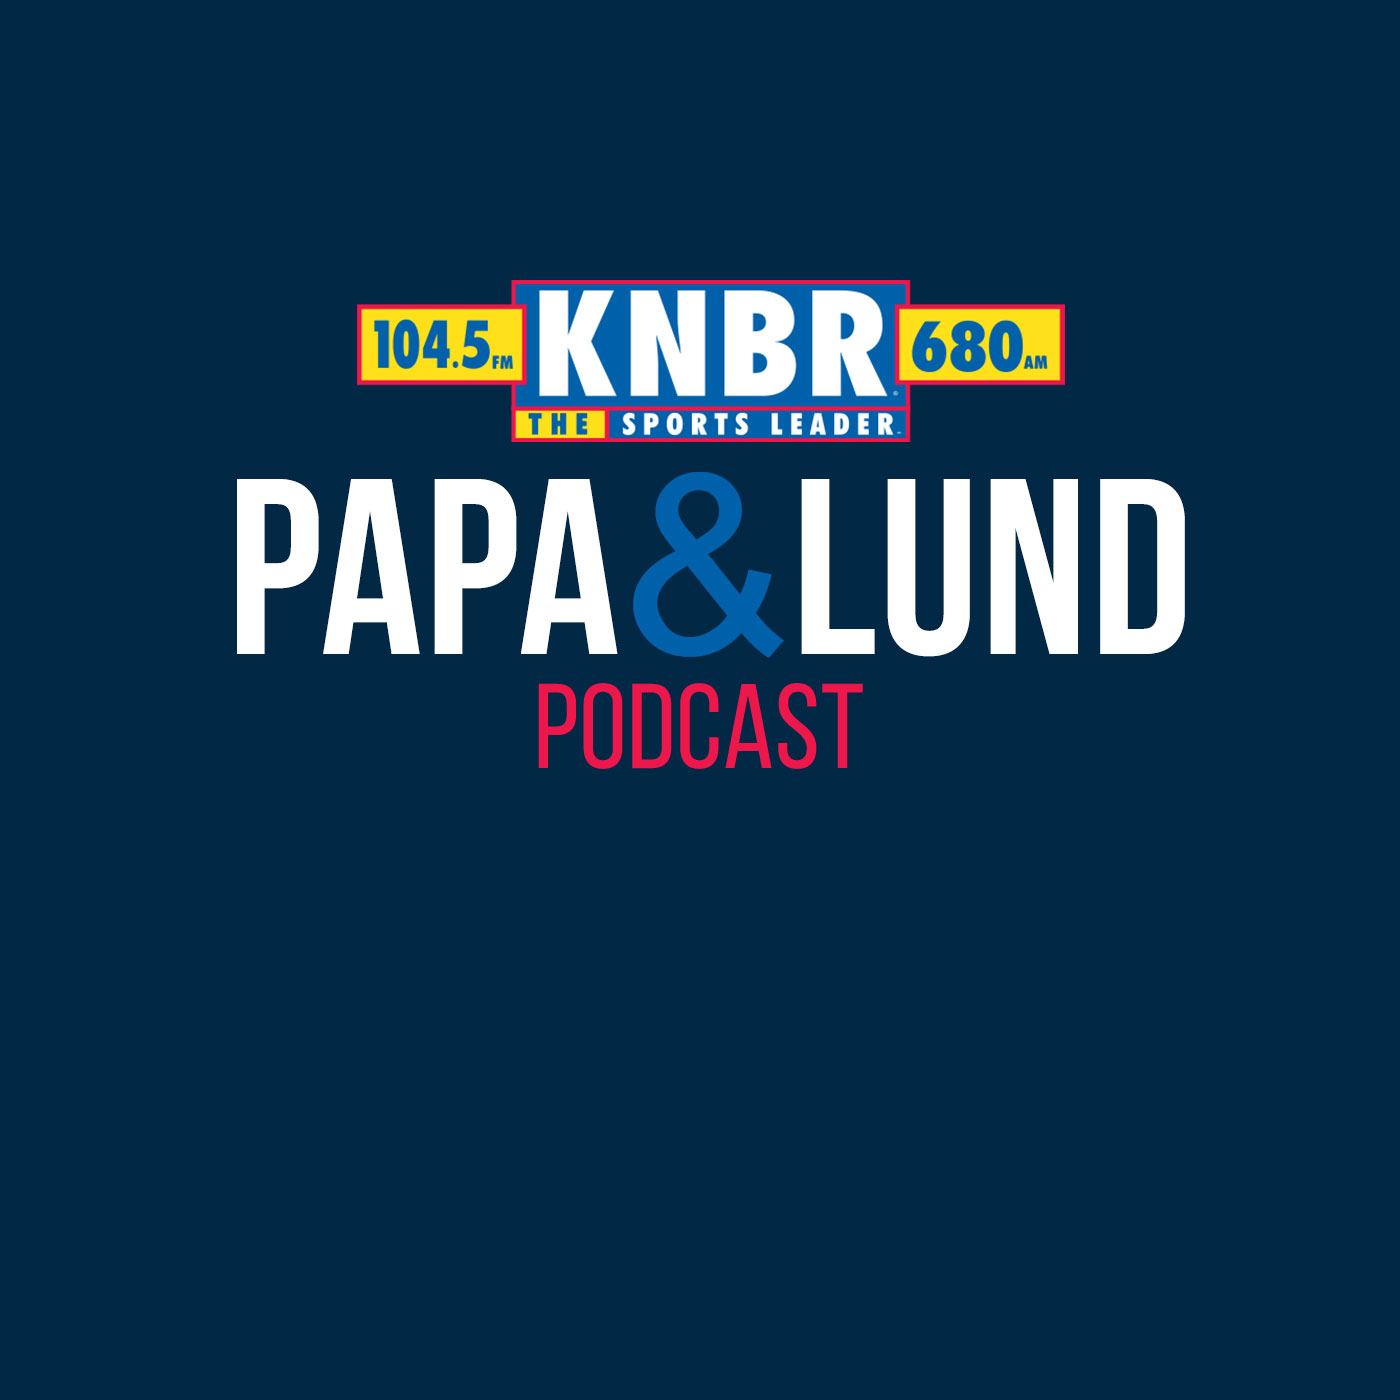 2-7 Erik Kramer joins Papa & Lund LIVE from Media Row to discuss the real traumas from playing football and from life and gives perspective and advice on how to overcome those traumas